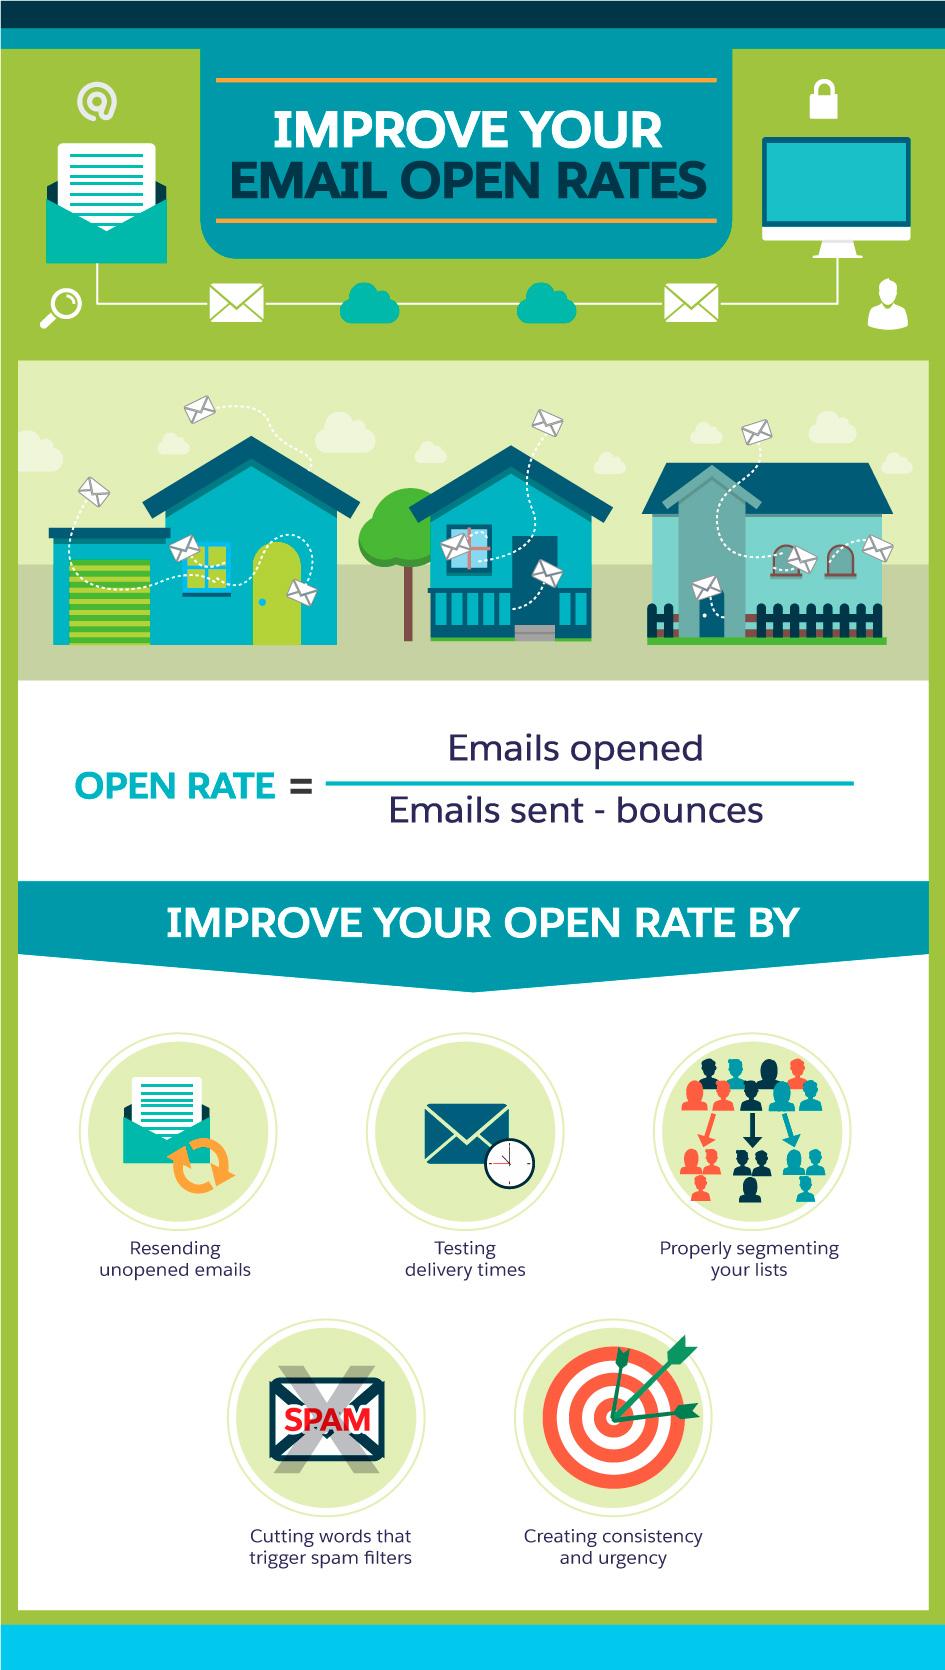 13 Email Marketing Tips to Increase Open Rates, Click-Throughs, and Shares - Salesforce Canada Blog